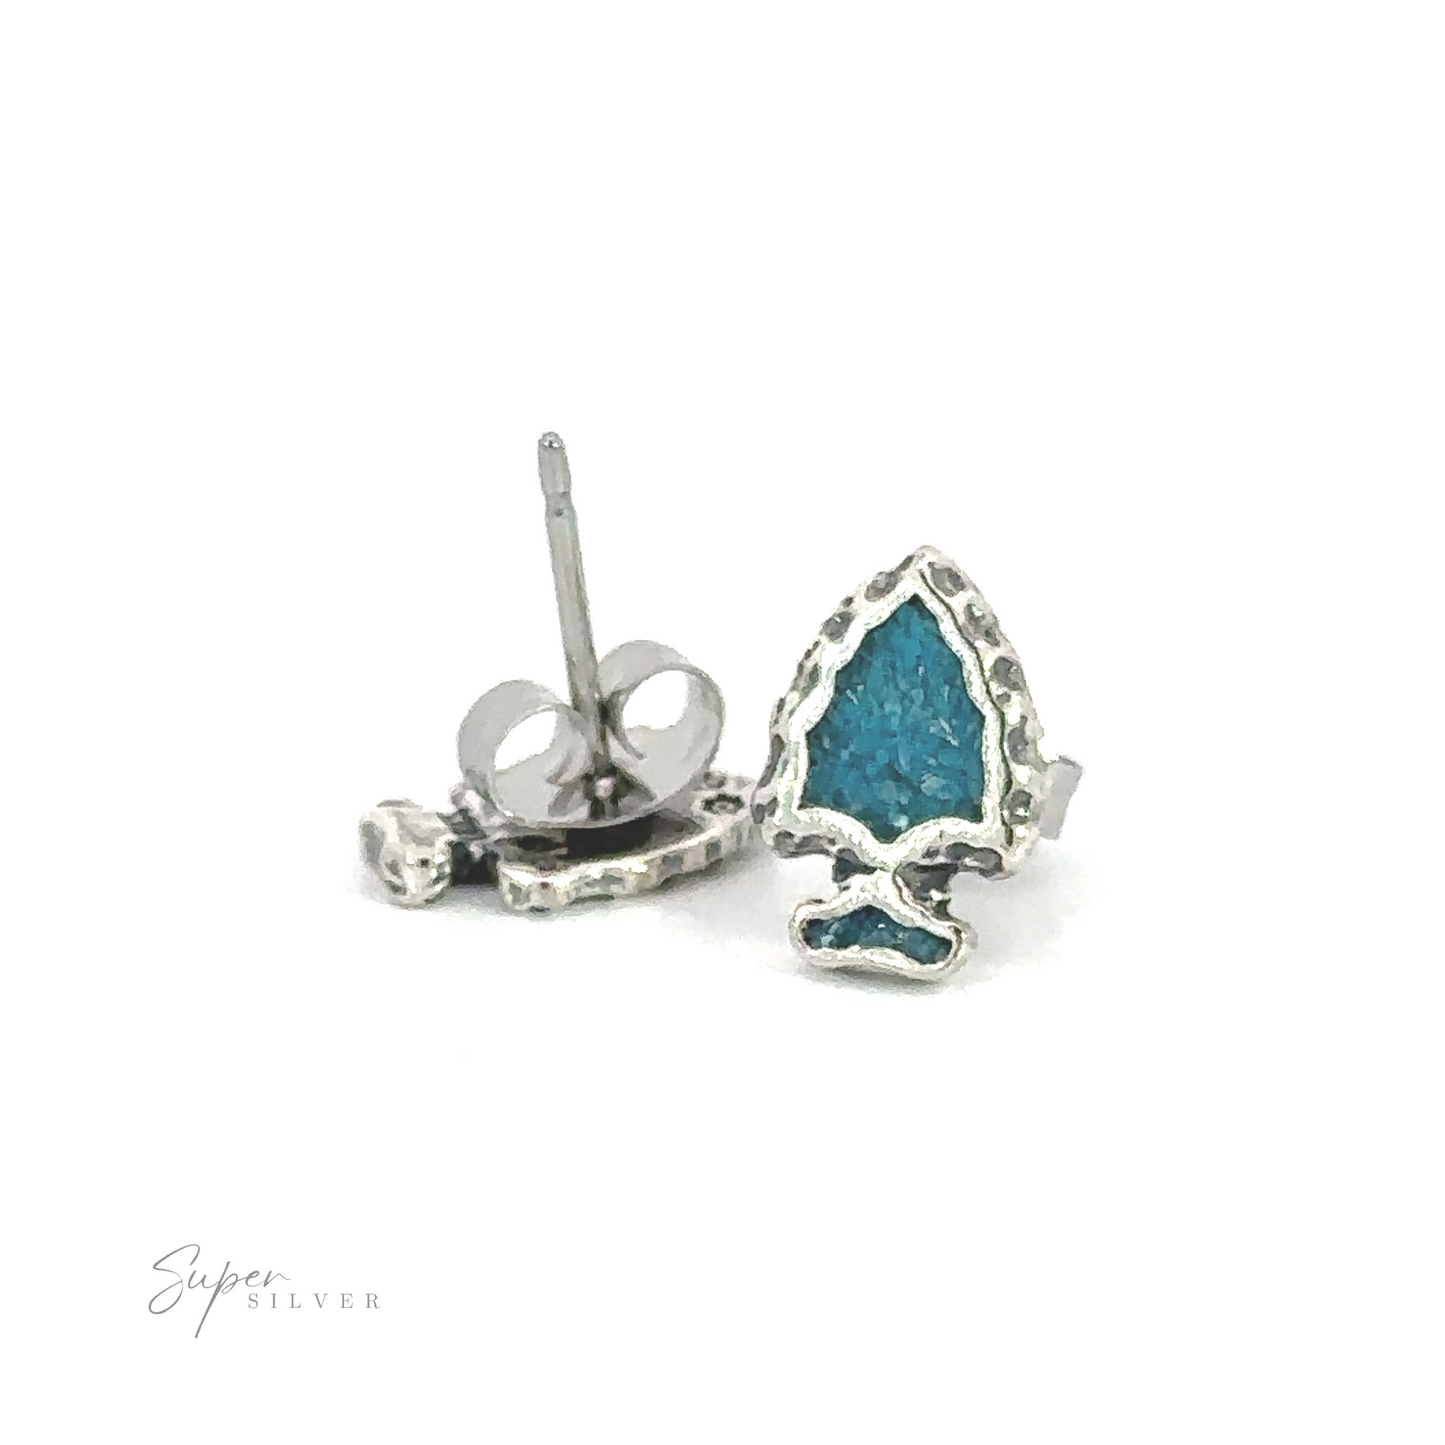 A pair of Turquoise Arrowhead Studs on a white background, showcasing the exquisite craftsmanship and elegant design of these arrowhead studs. Perfect for adding a touch of sophistication to any outfit.